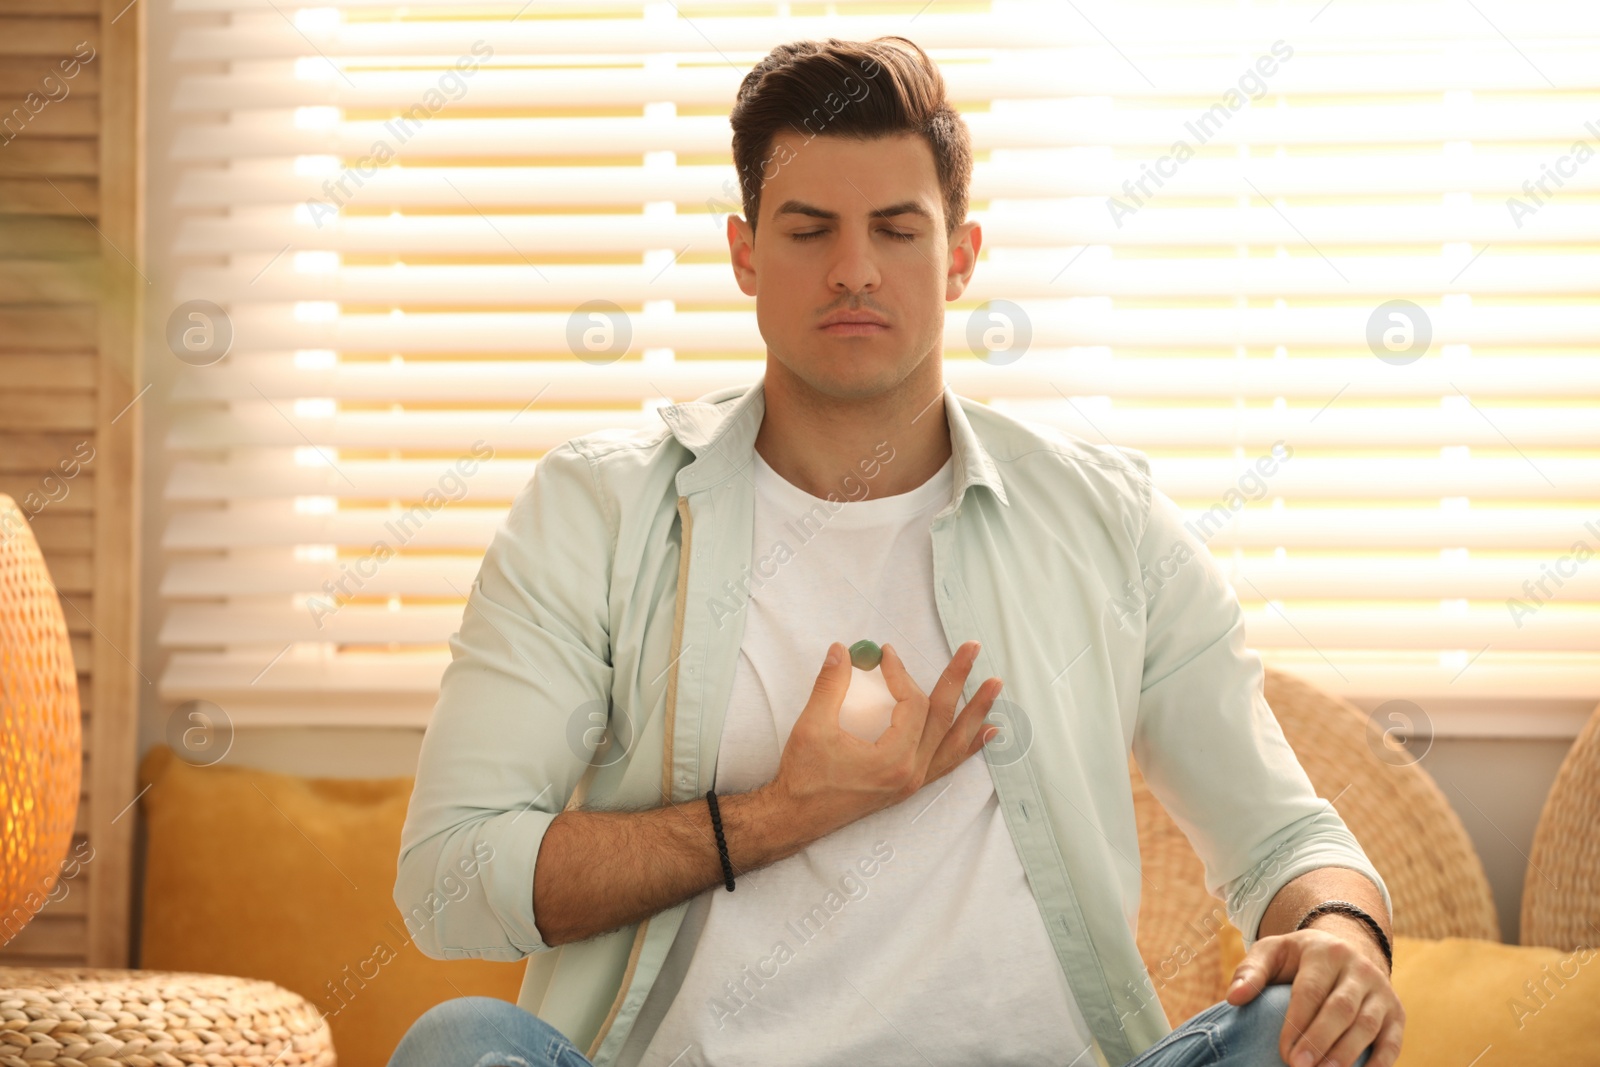 Photo of Man during self-healing session in therapy room